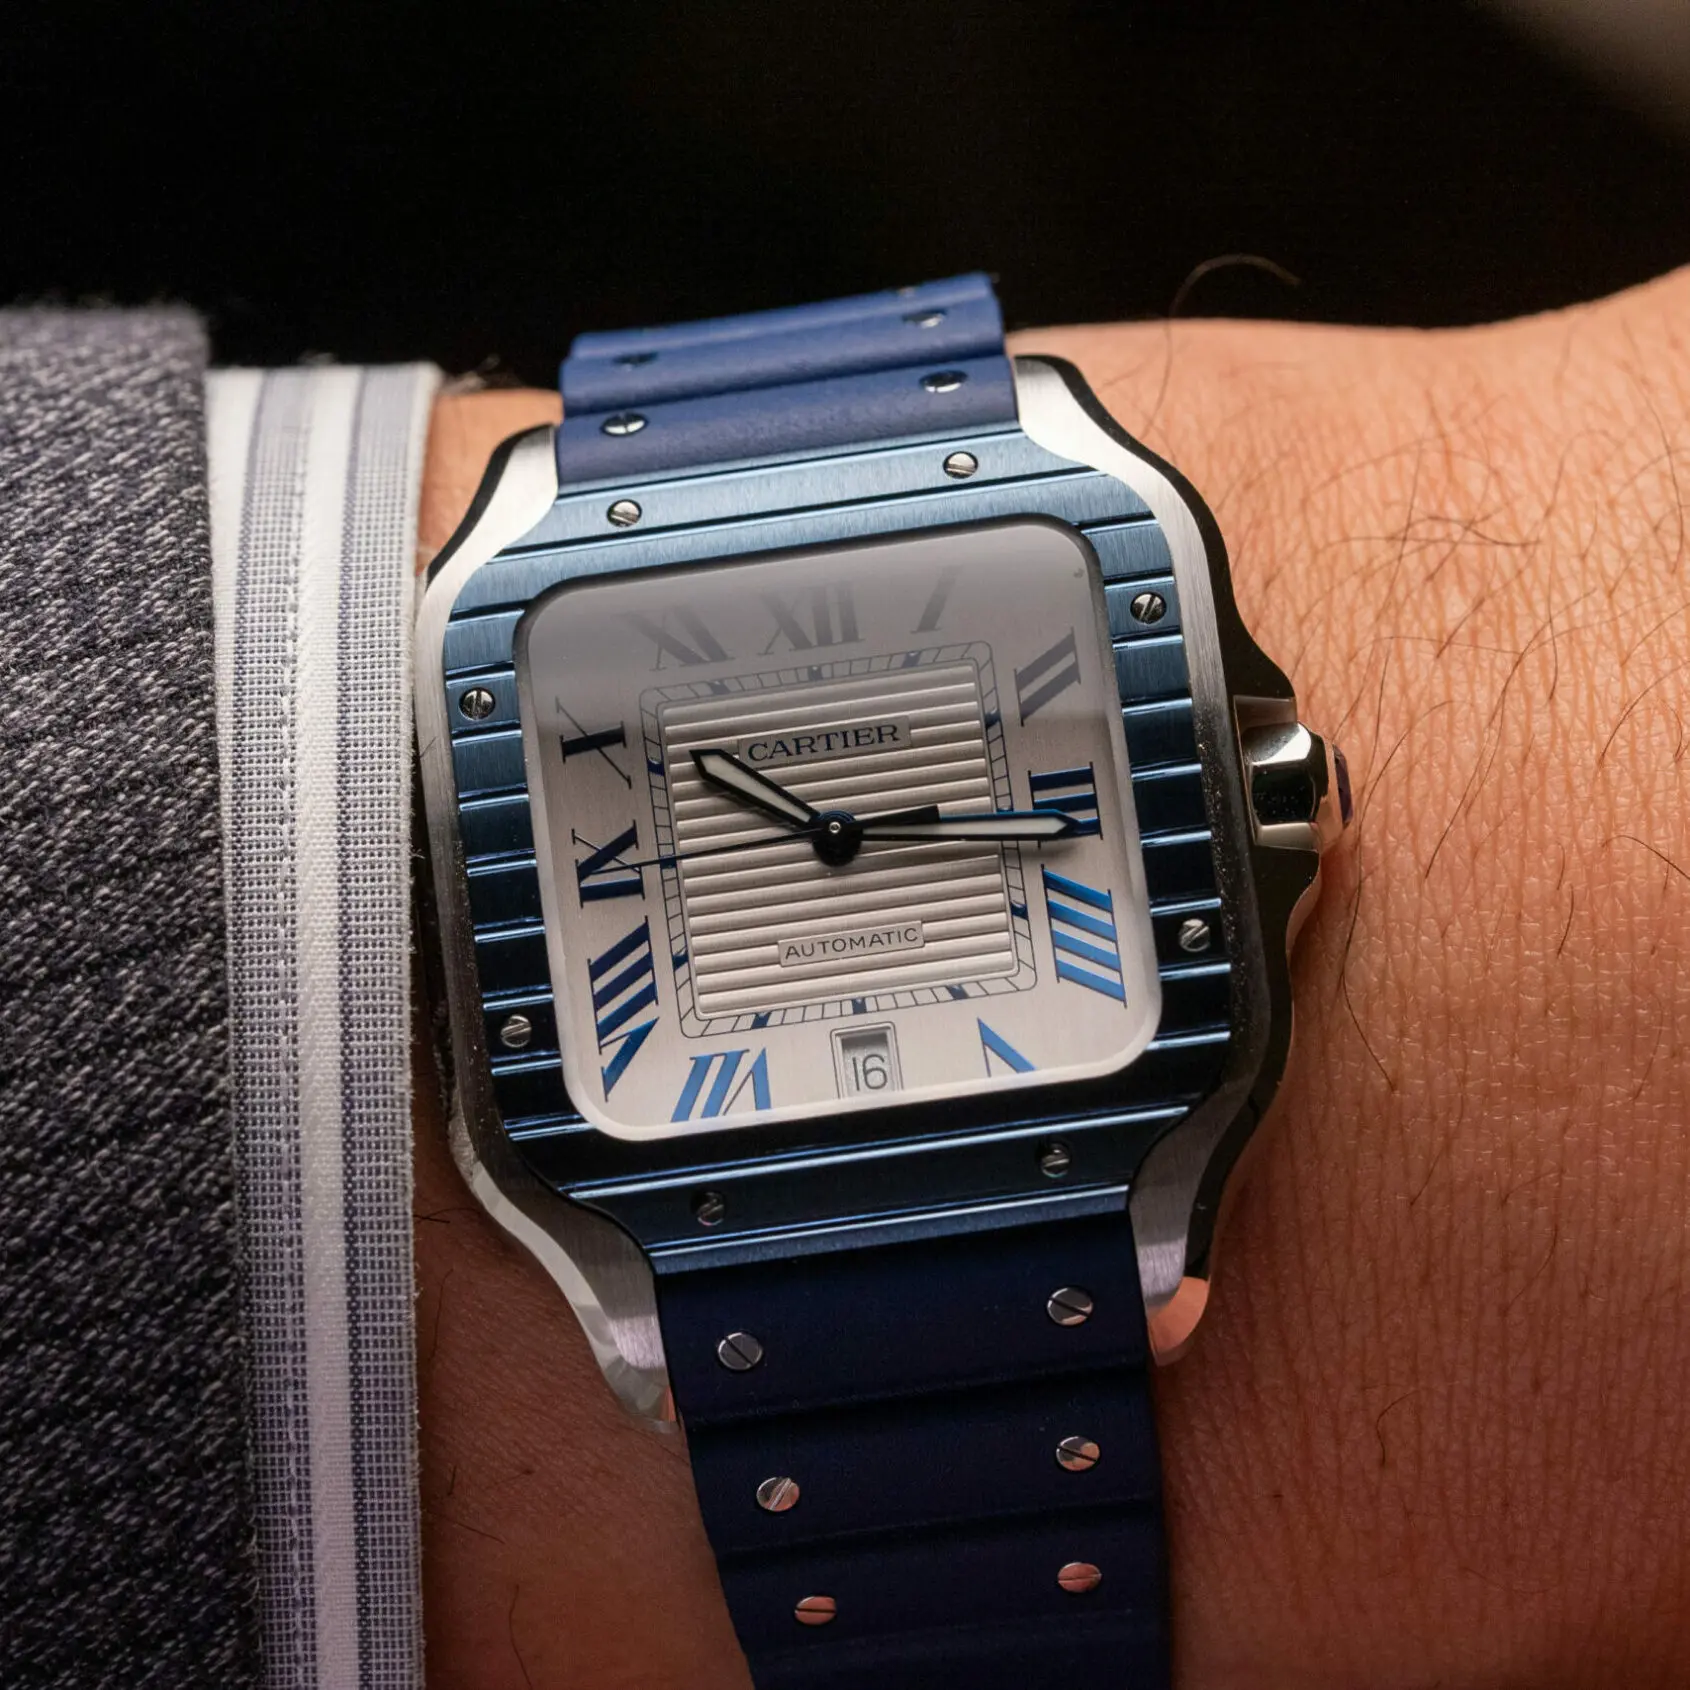 Cartier opens new Sydney boutique, here are 3 watches to see